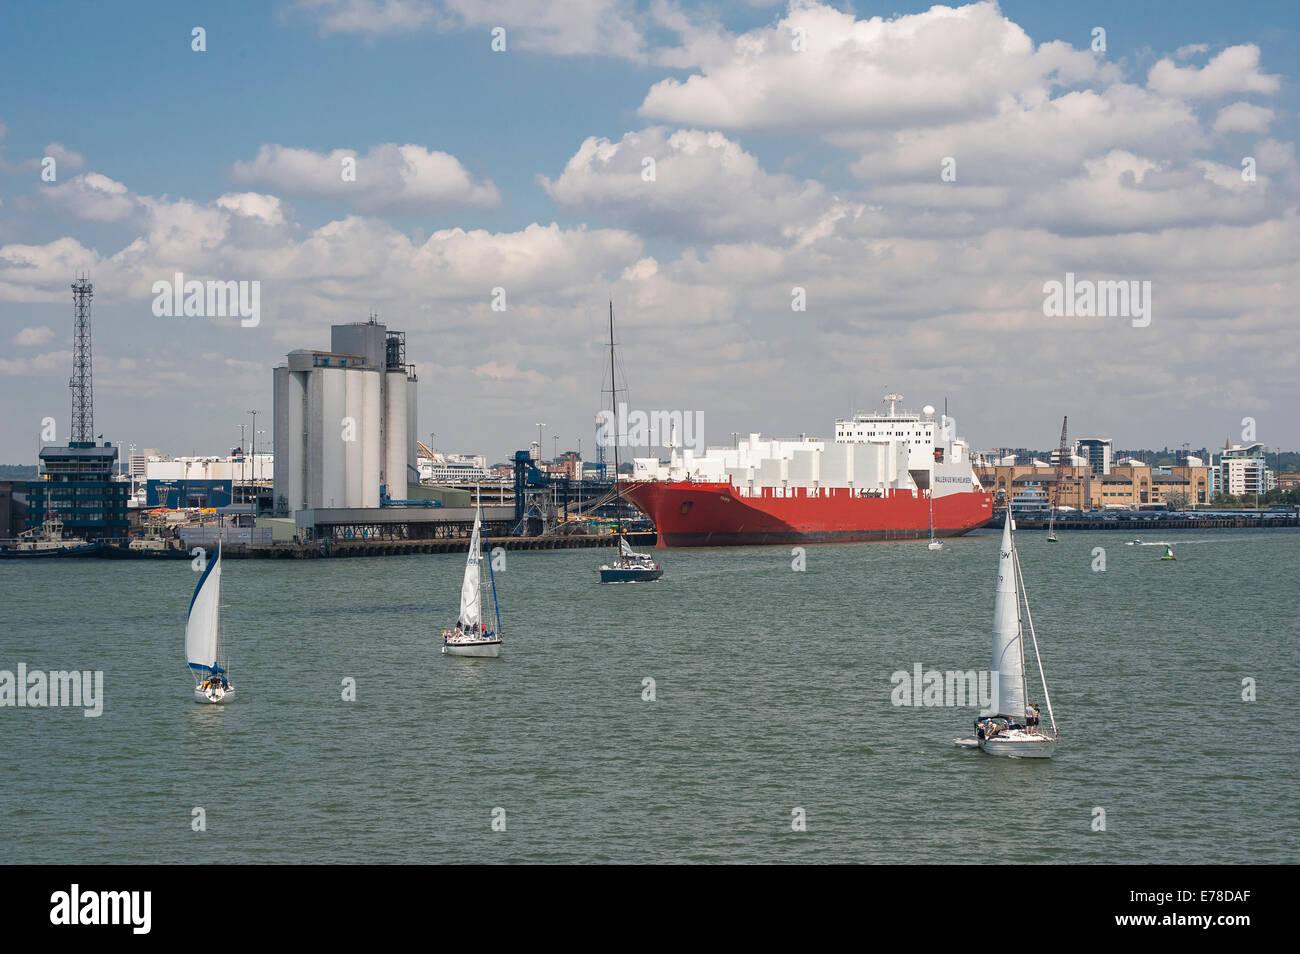 MV Tampa, roll on / roll off container ship in Southampton docks, England. Stock Photo